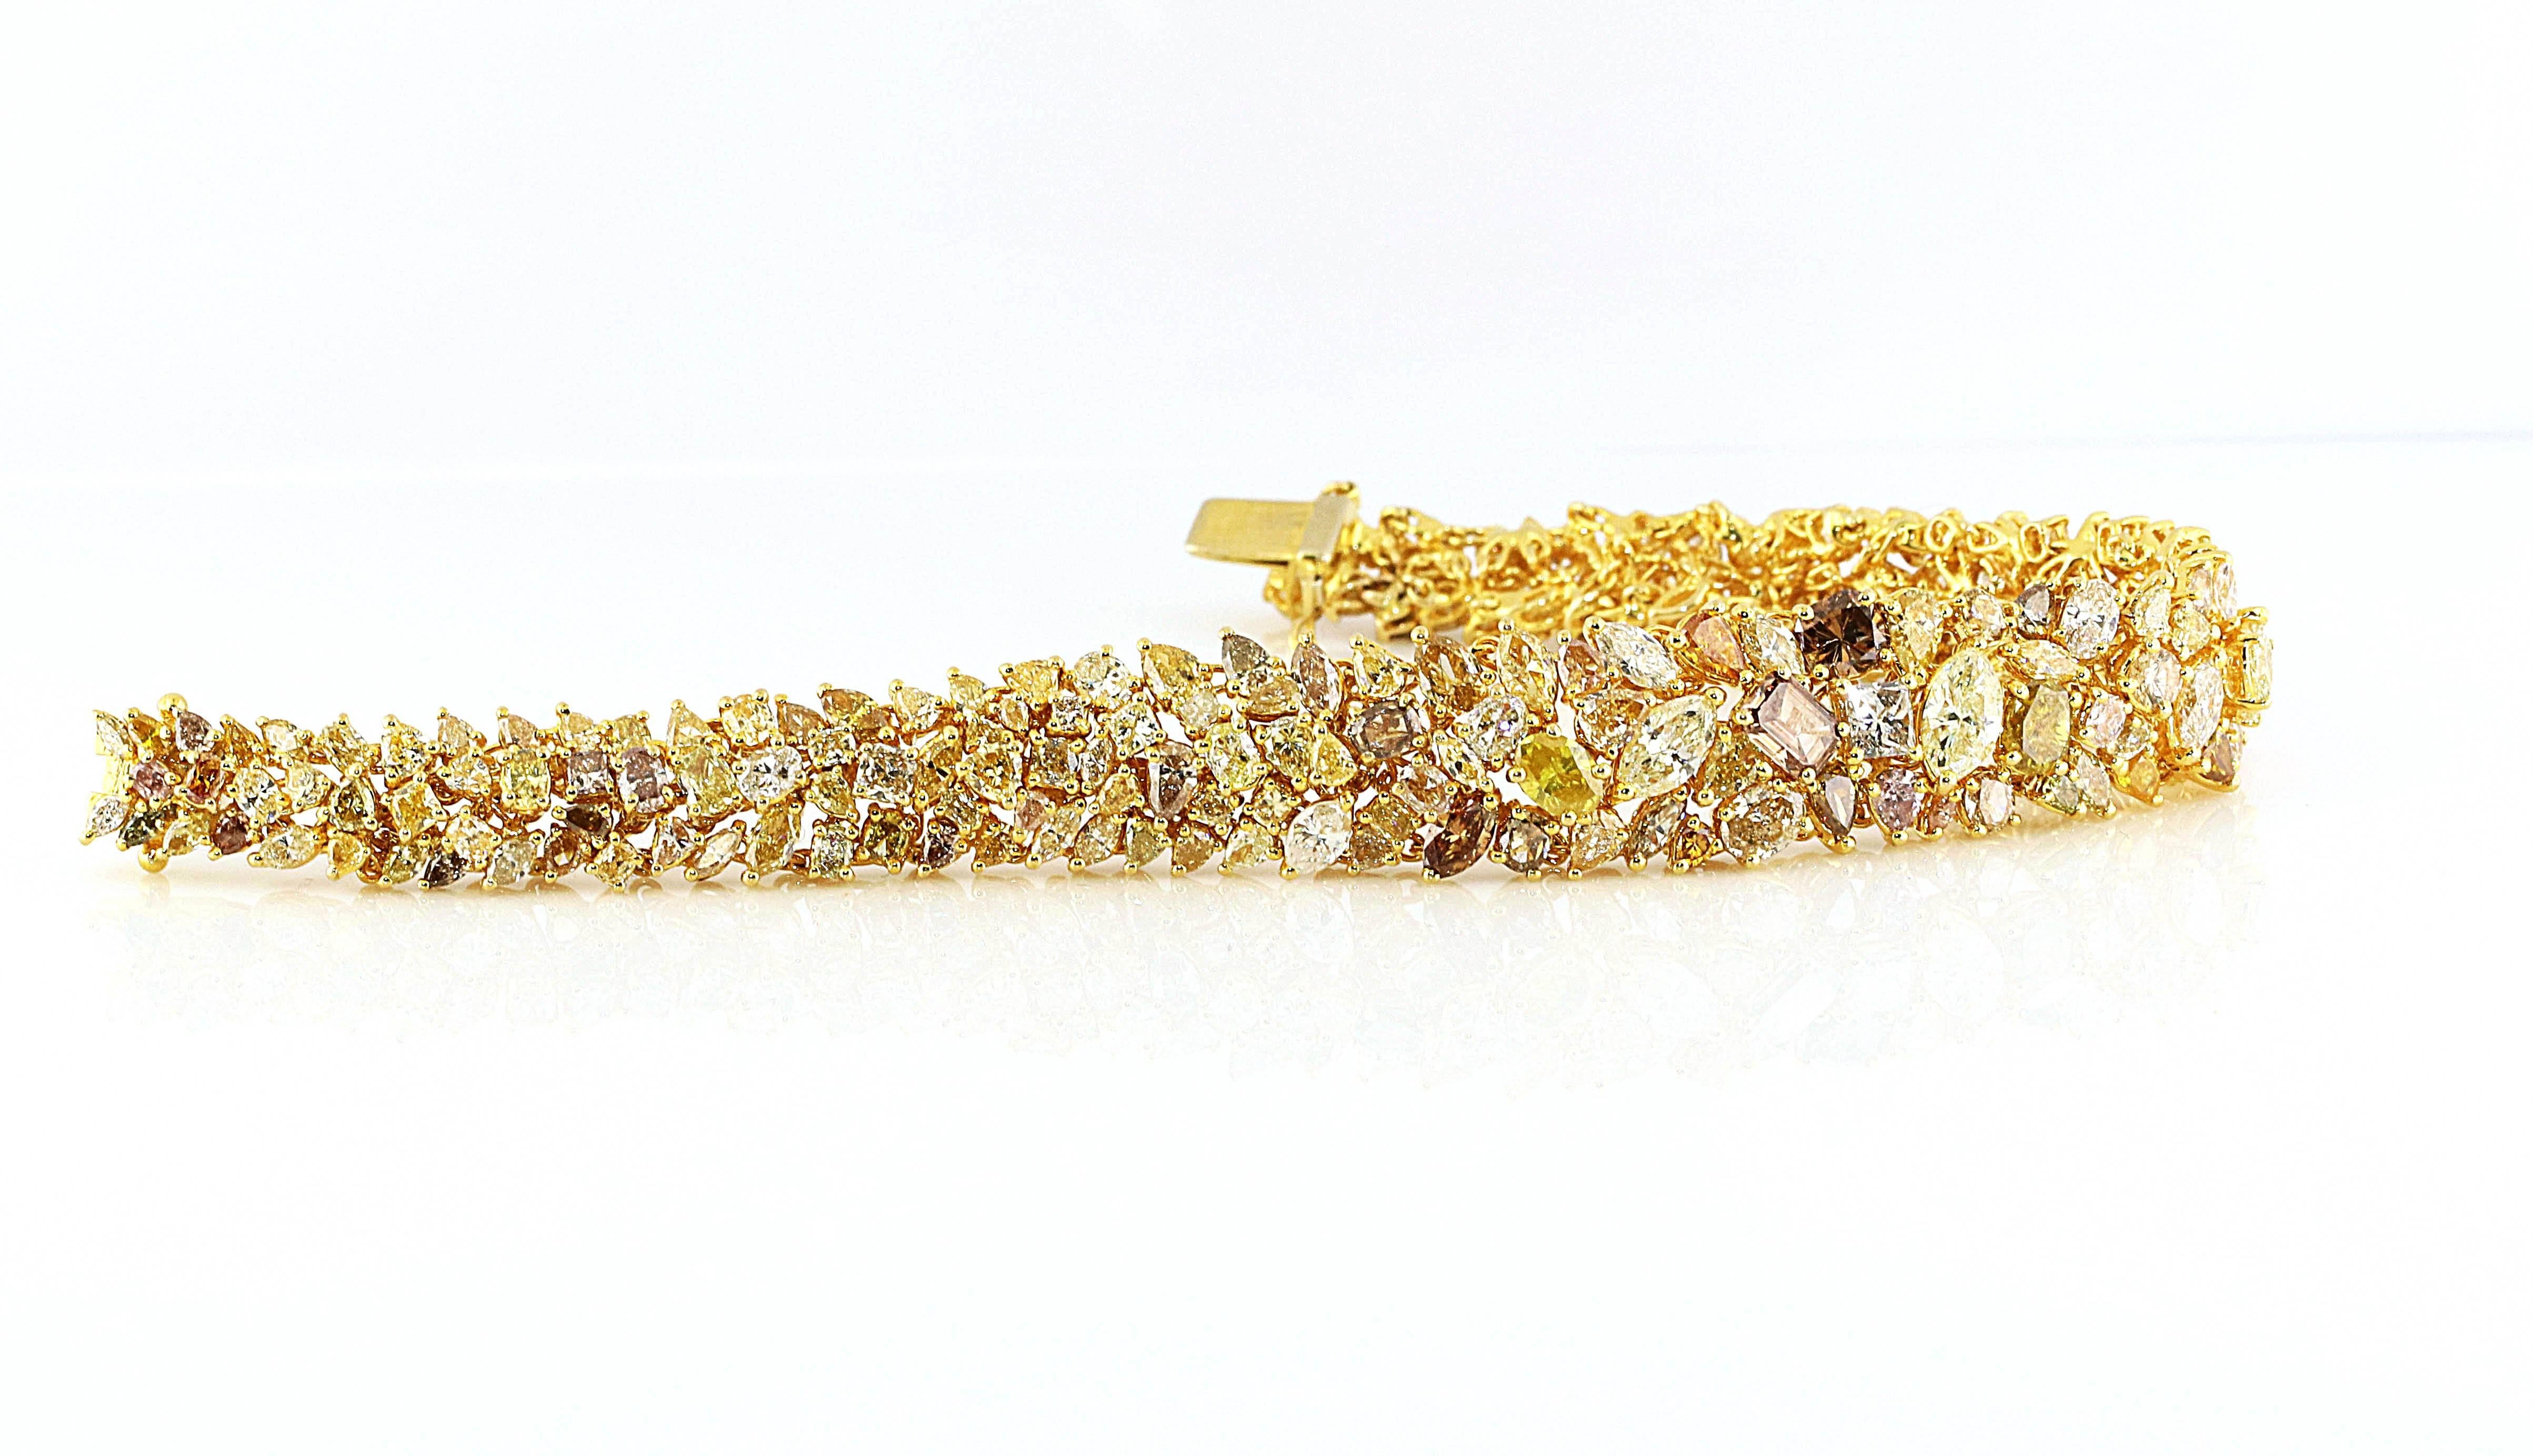 Yellows, pinks, browns and whites all set in gorgeous 18kt yellow gold make this an exquisite bracelet. Over 20.25 carats of natural multi-colored diamonds of all different shapes. There are many pear cuts, marquise cuts, round cuts and emerald